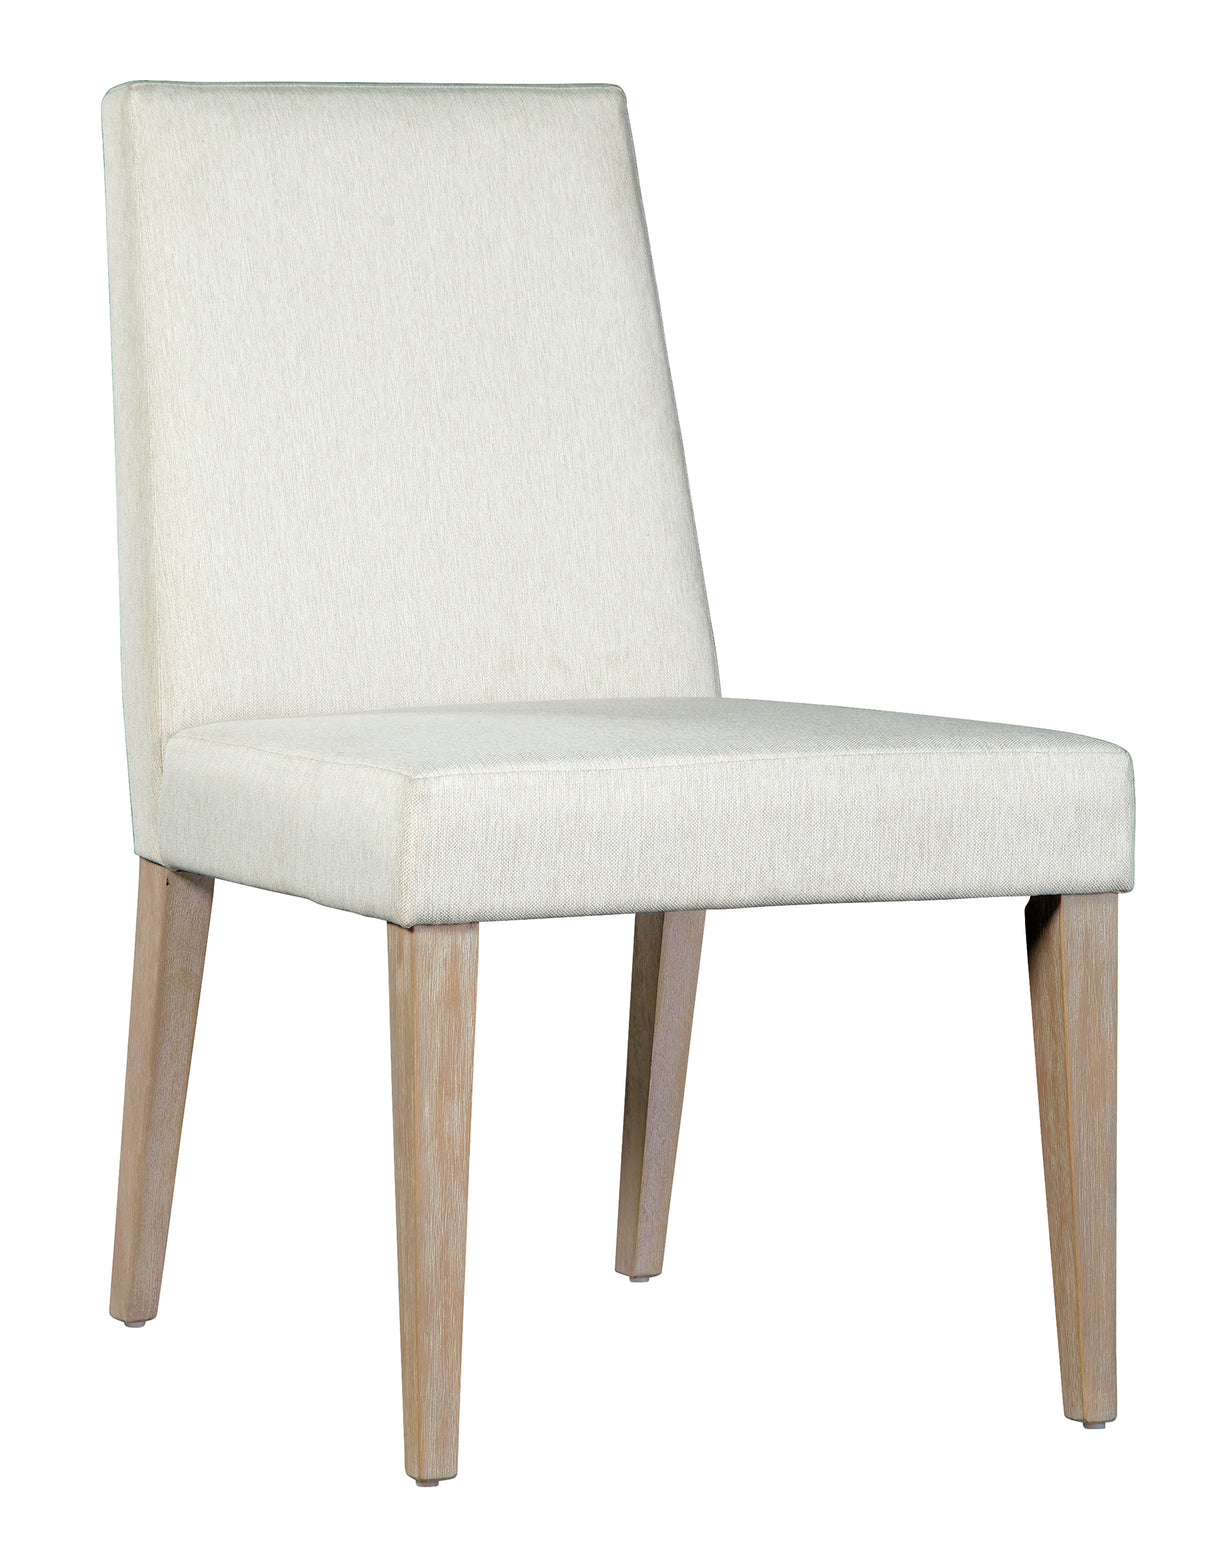 Hekman 25323 Scottsdale 21.5in. x 25.75in. x 35.25in. Upholstered Dining Side Chair